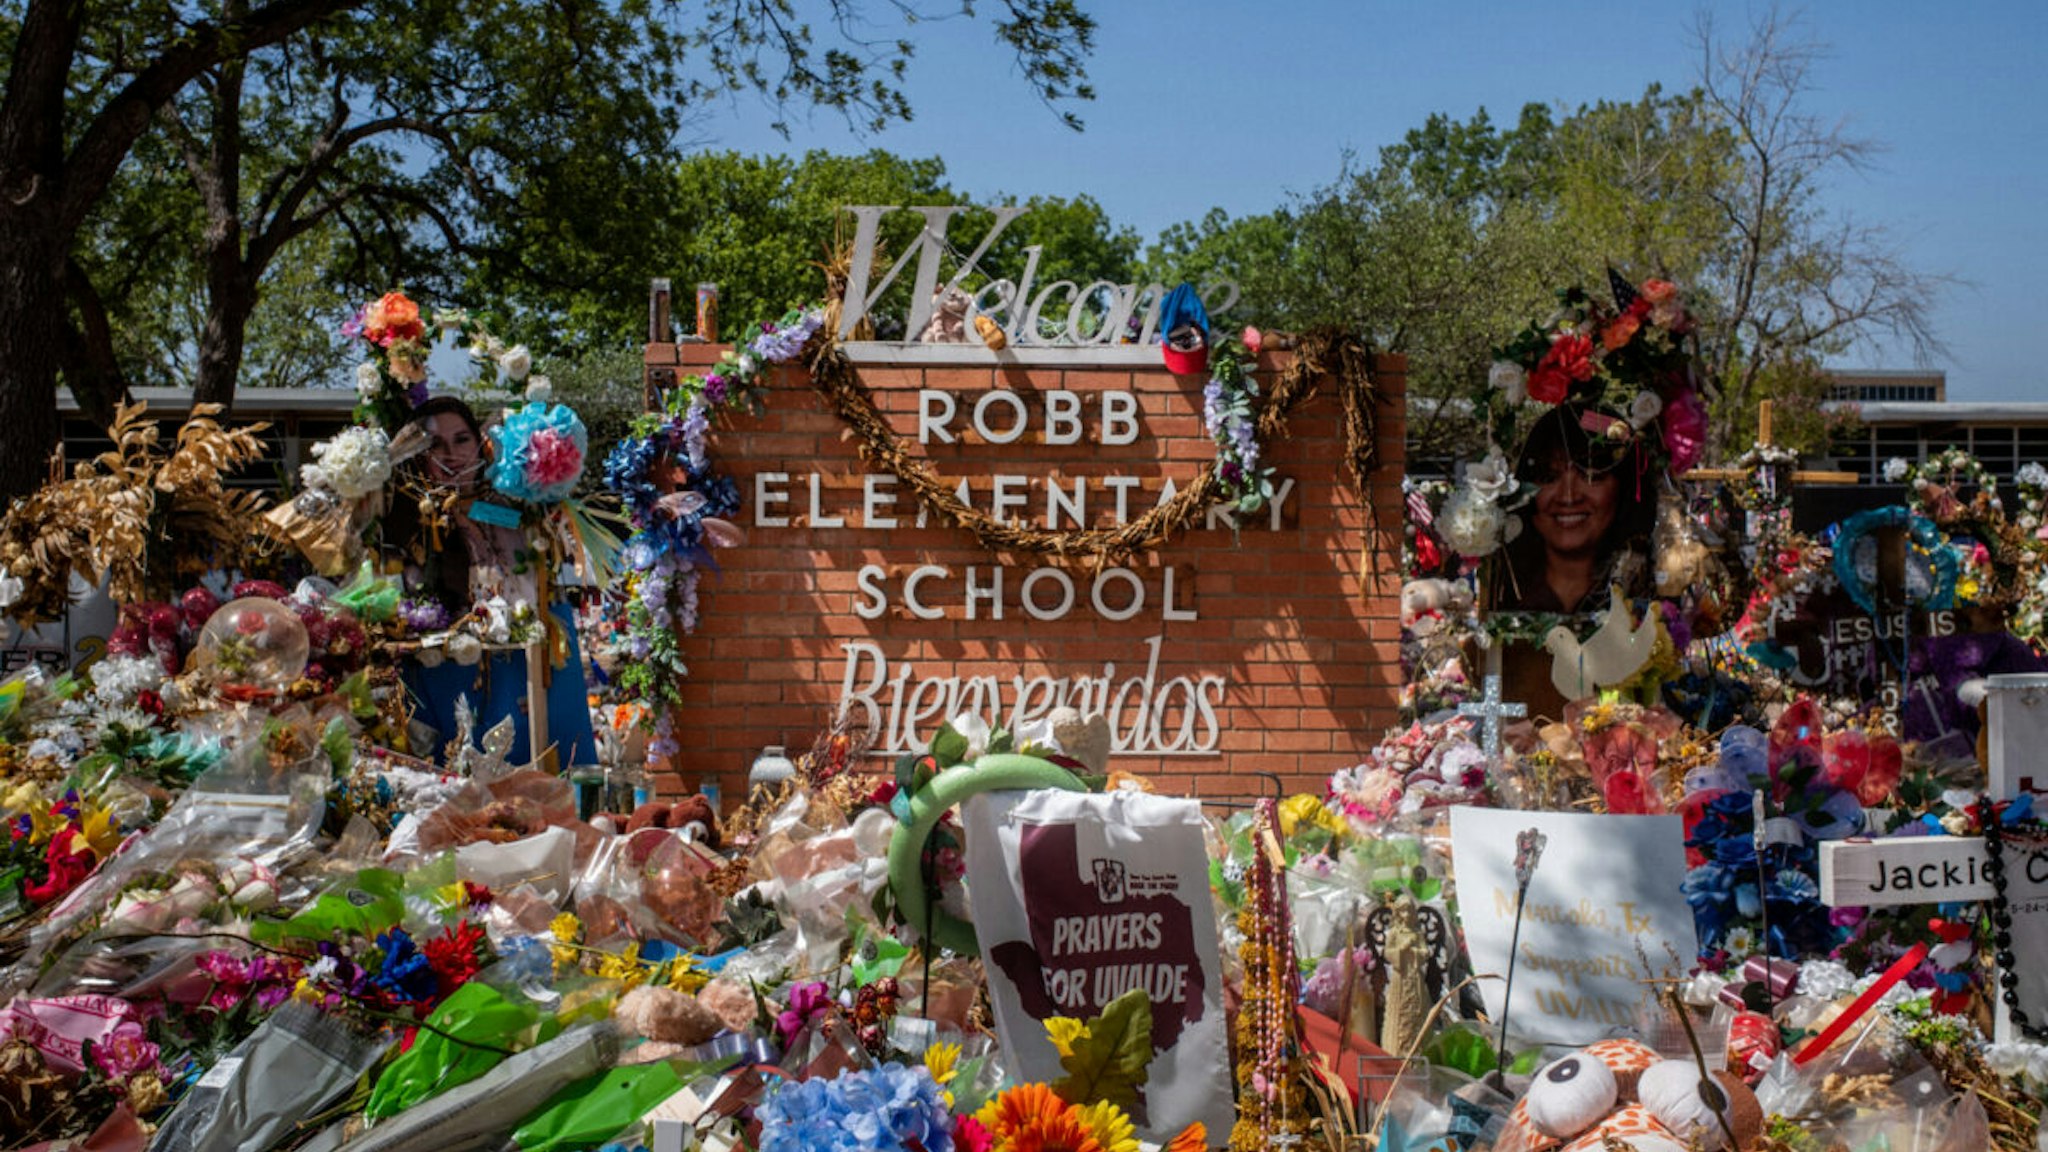 The Robb Elementary School sign is seen covered in flowers and gifts on June 17, 2022 in Uvalde, Texas. Committees have begun inviting testimony from law enforcement authorities, family members and witnesses regarding the mass shooting at Robb Elementary School which killed 19 children and two adults